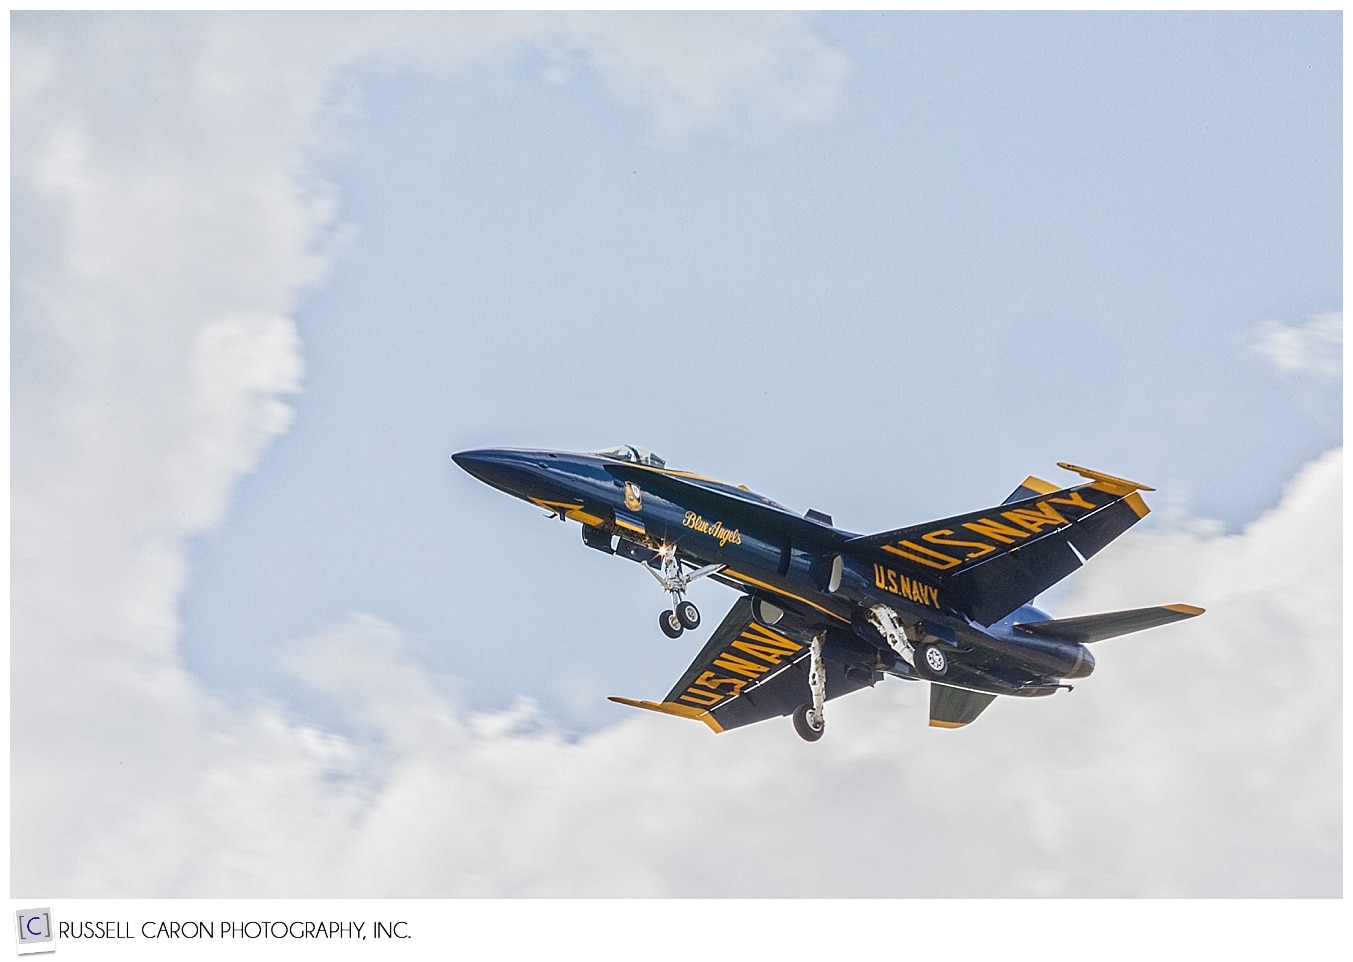 A solo US Navy Blue Angel preparing to land